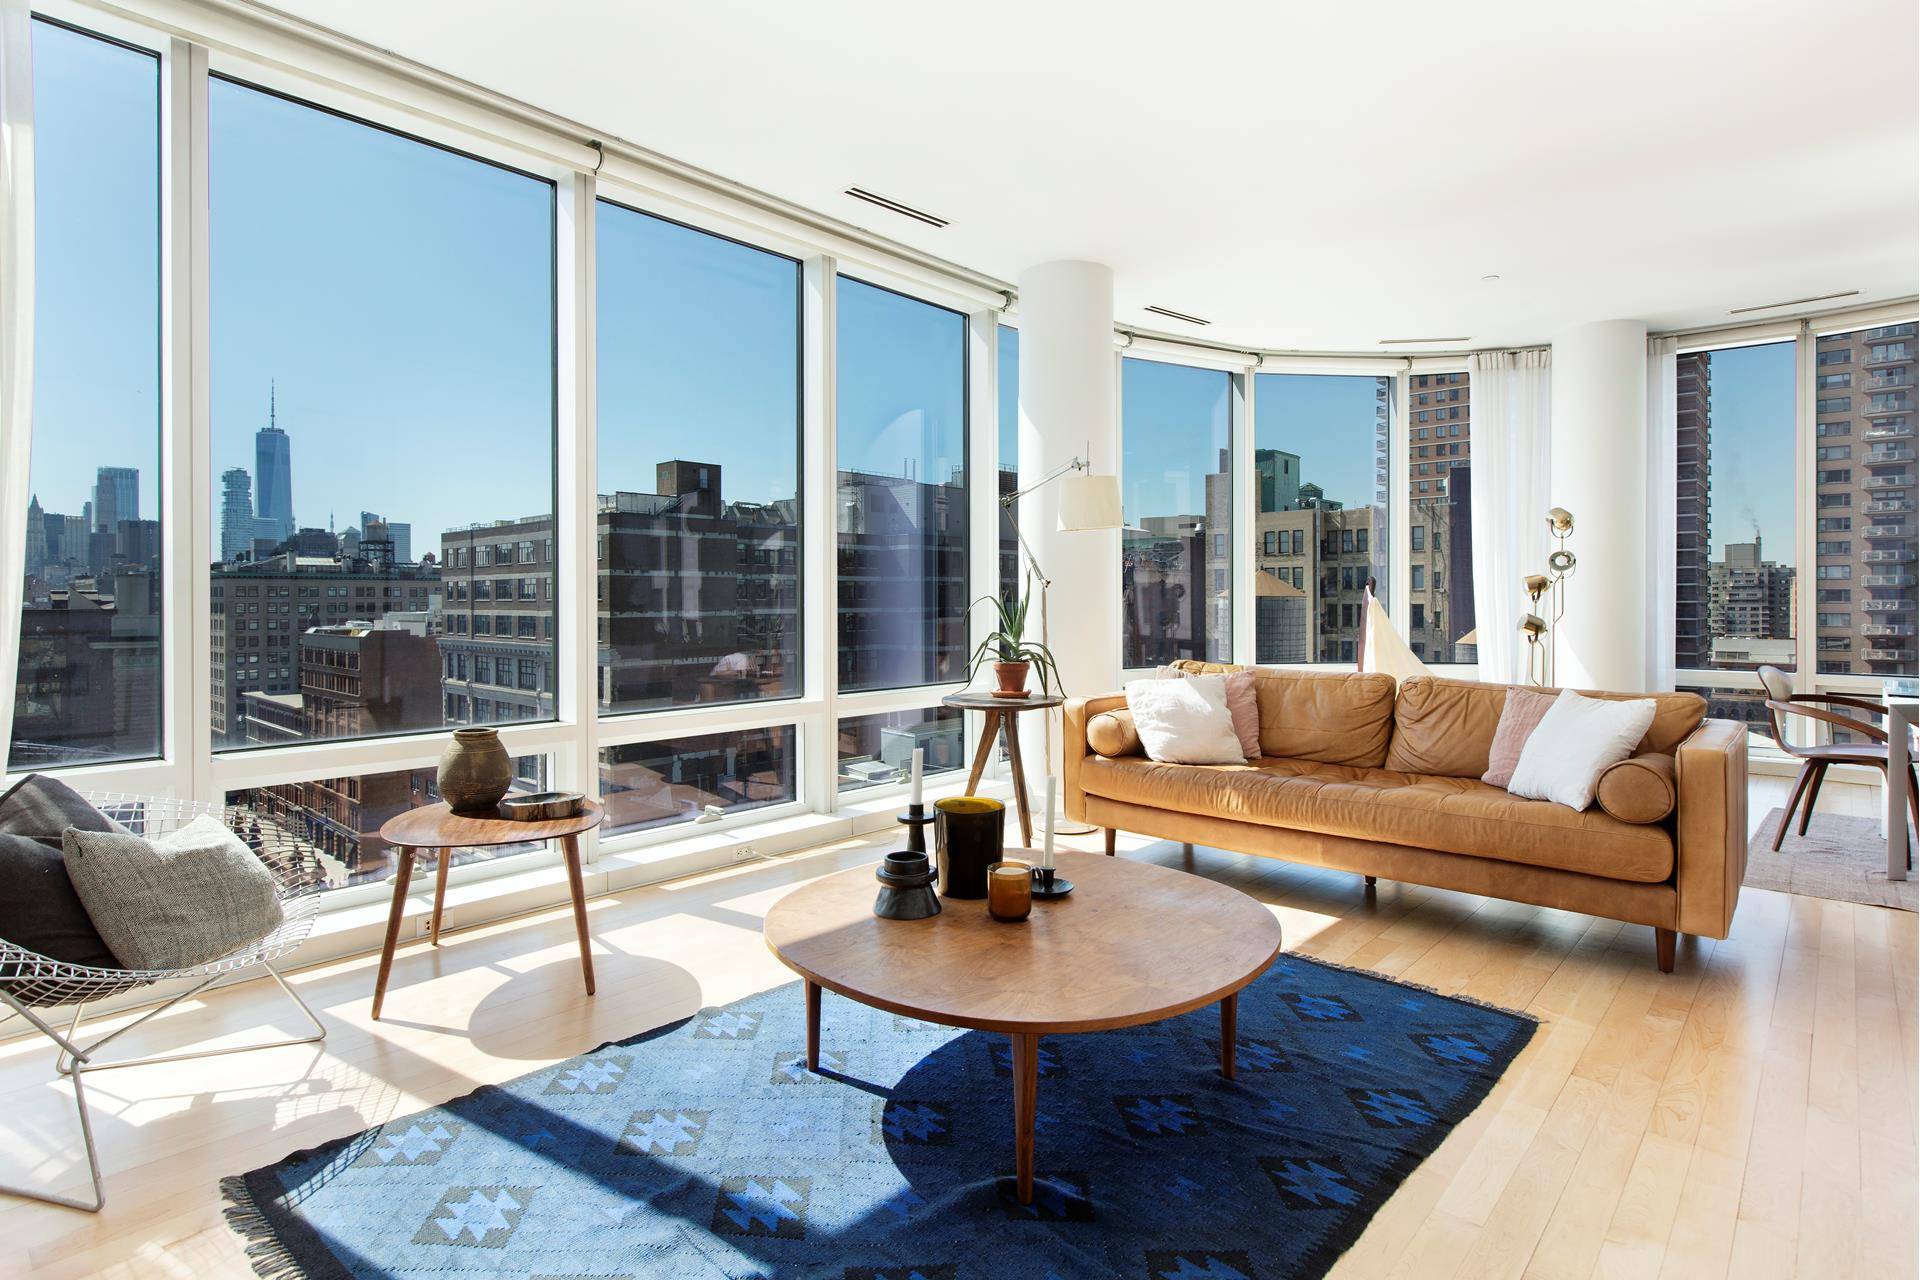 From the minute you enter this luxurious loft like apartment, you are blown away by the contiguous floor to ceiling windows, the incredible sun light, with the most magical view ...